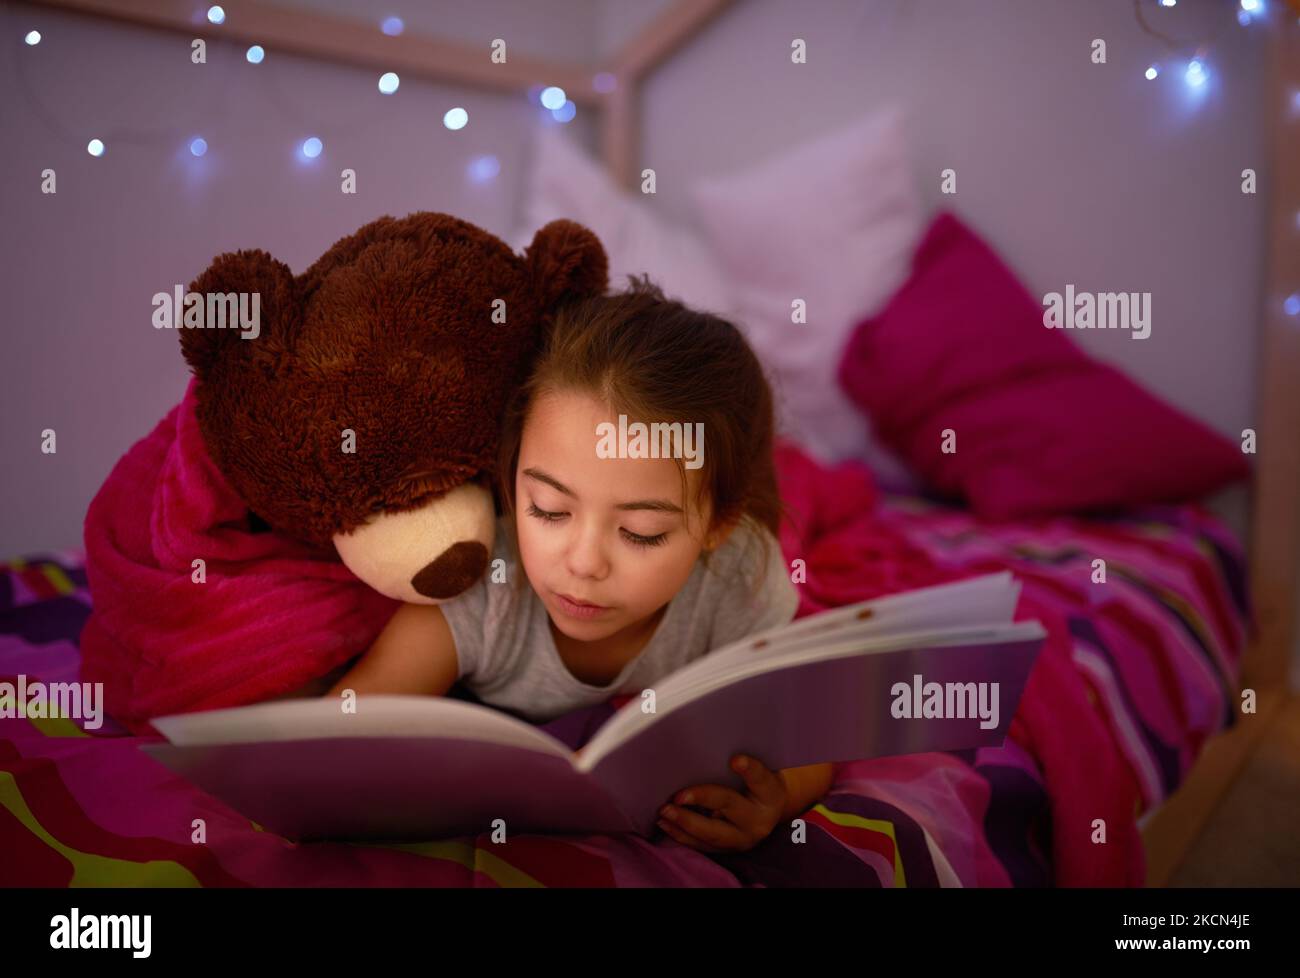 Its a story to spark the sweetest of dreams. a little girl reading a book in bed with her teddybear. Stock Photo